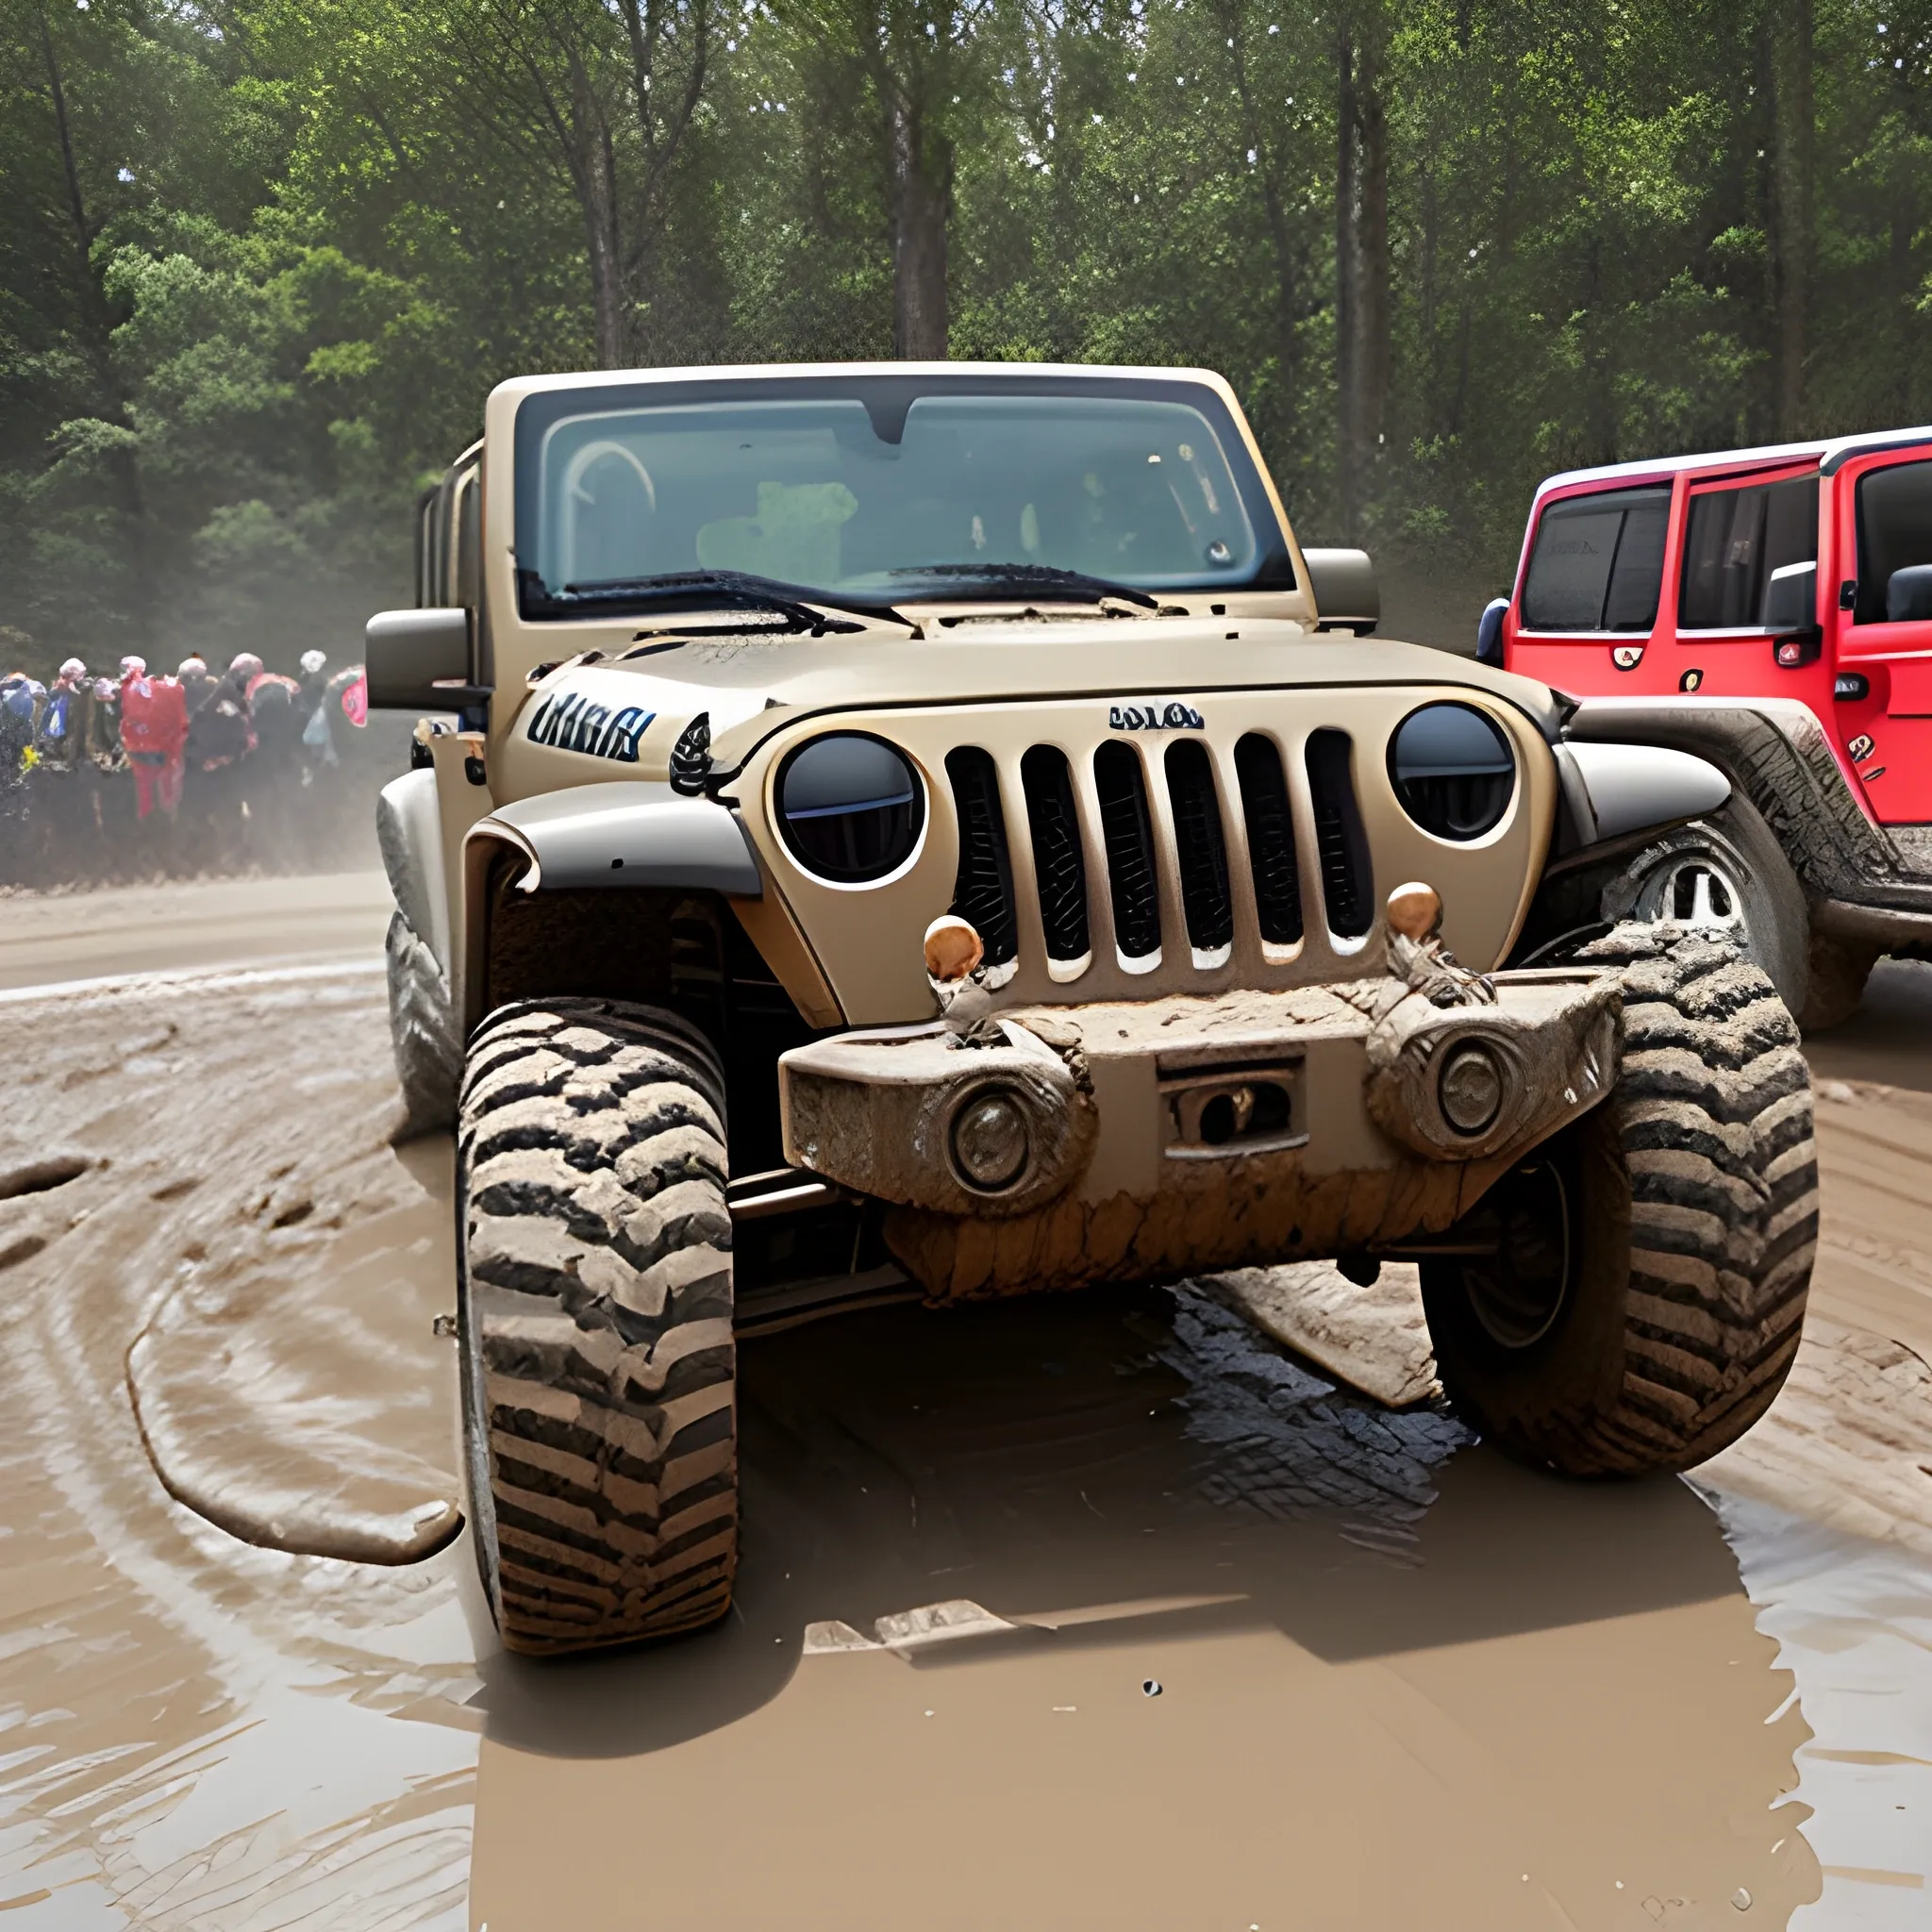  2 jeeps stright view
 in mud racing 
